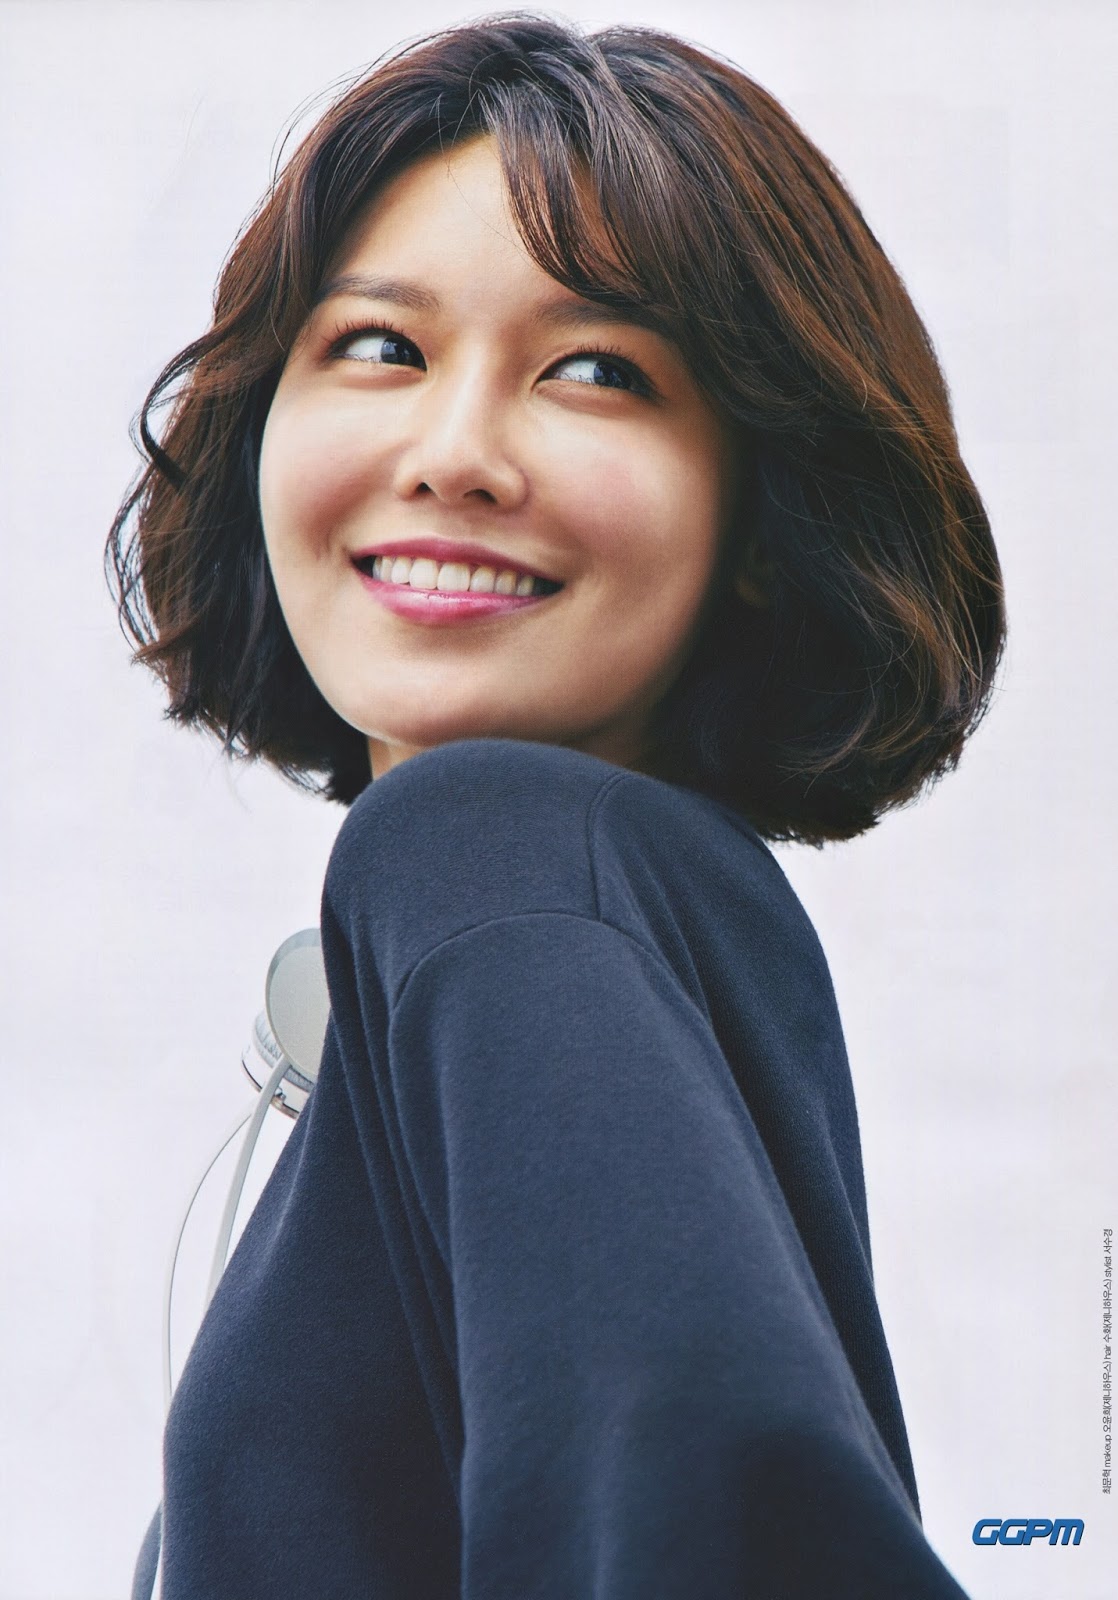 Choi Sooyoung - Cosmopolitan 'BEAUTY ICON OF THE YEAR' | You Only Live Once